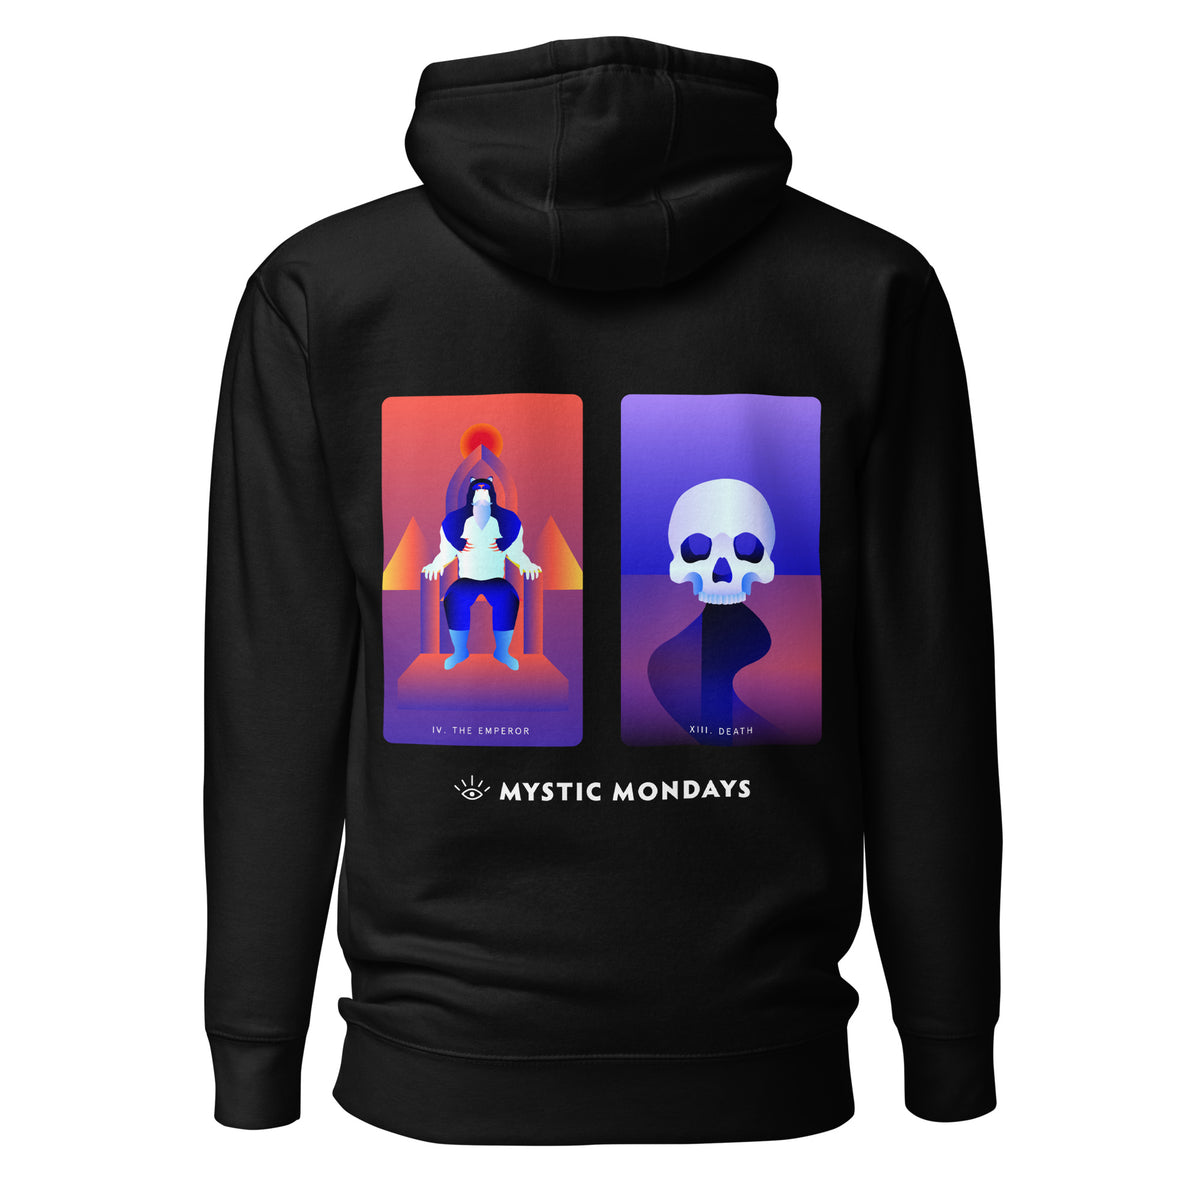 The Emperor and Death Hoodie